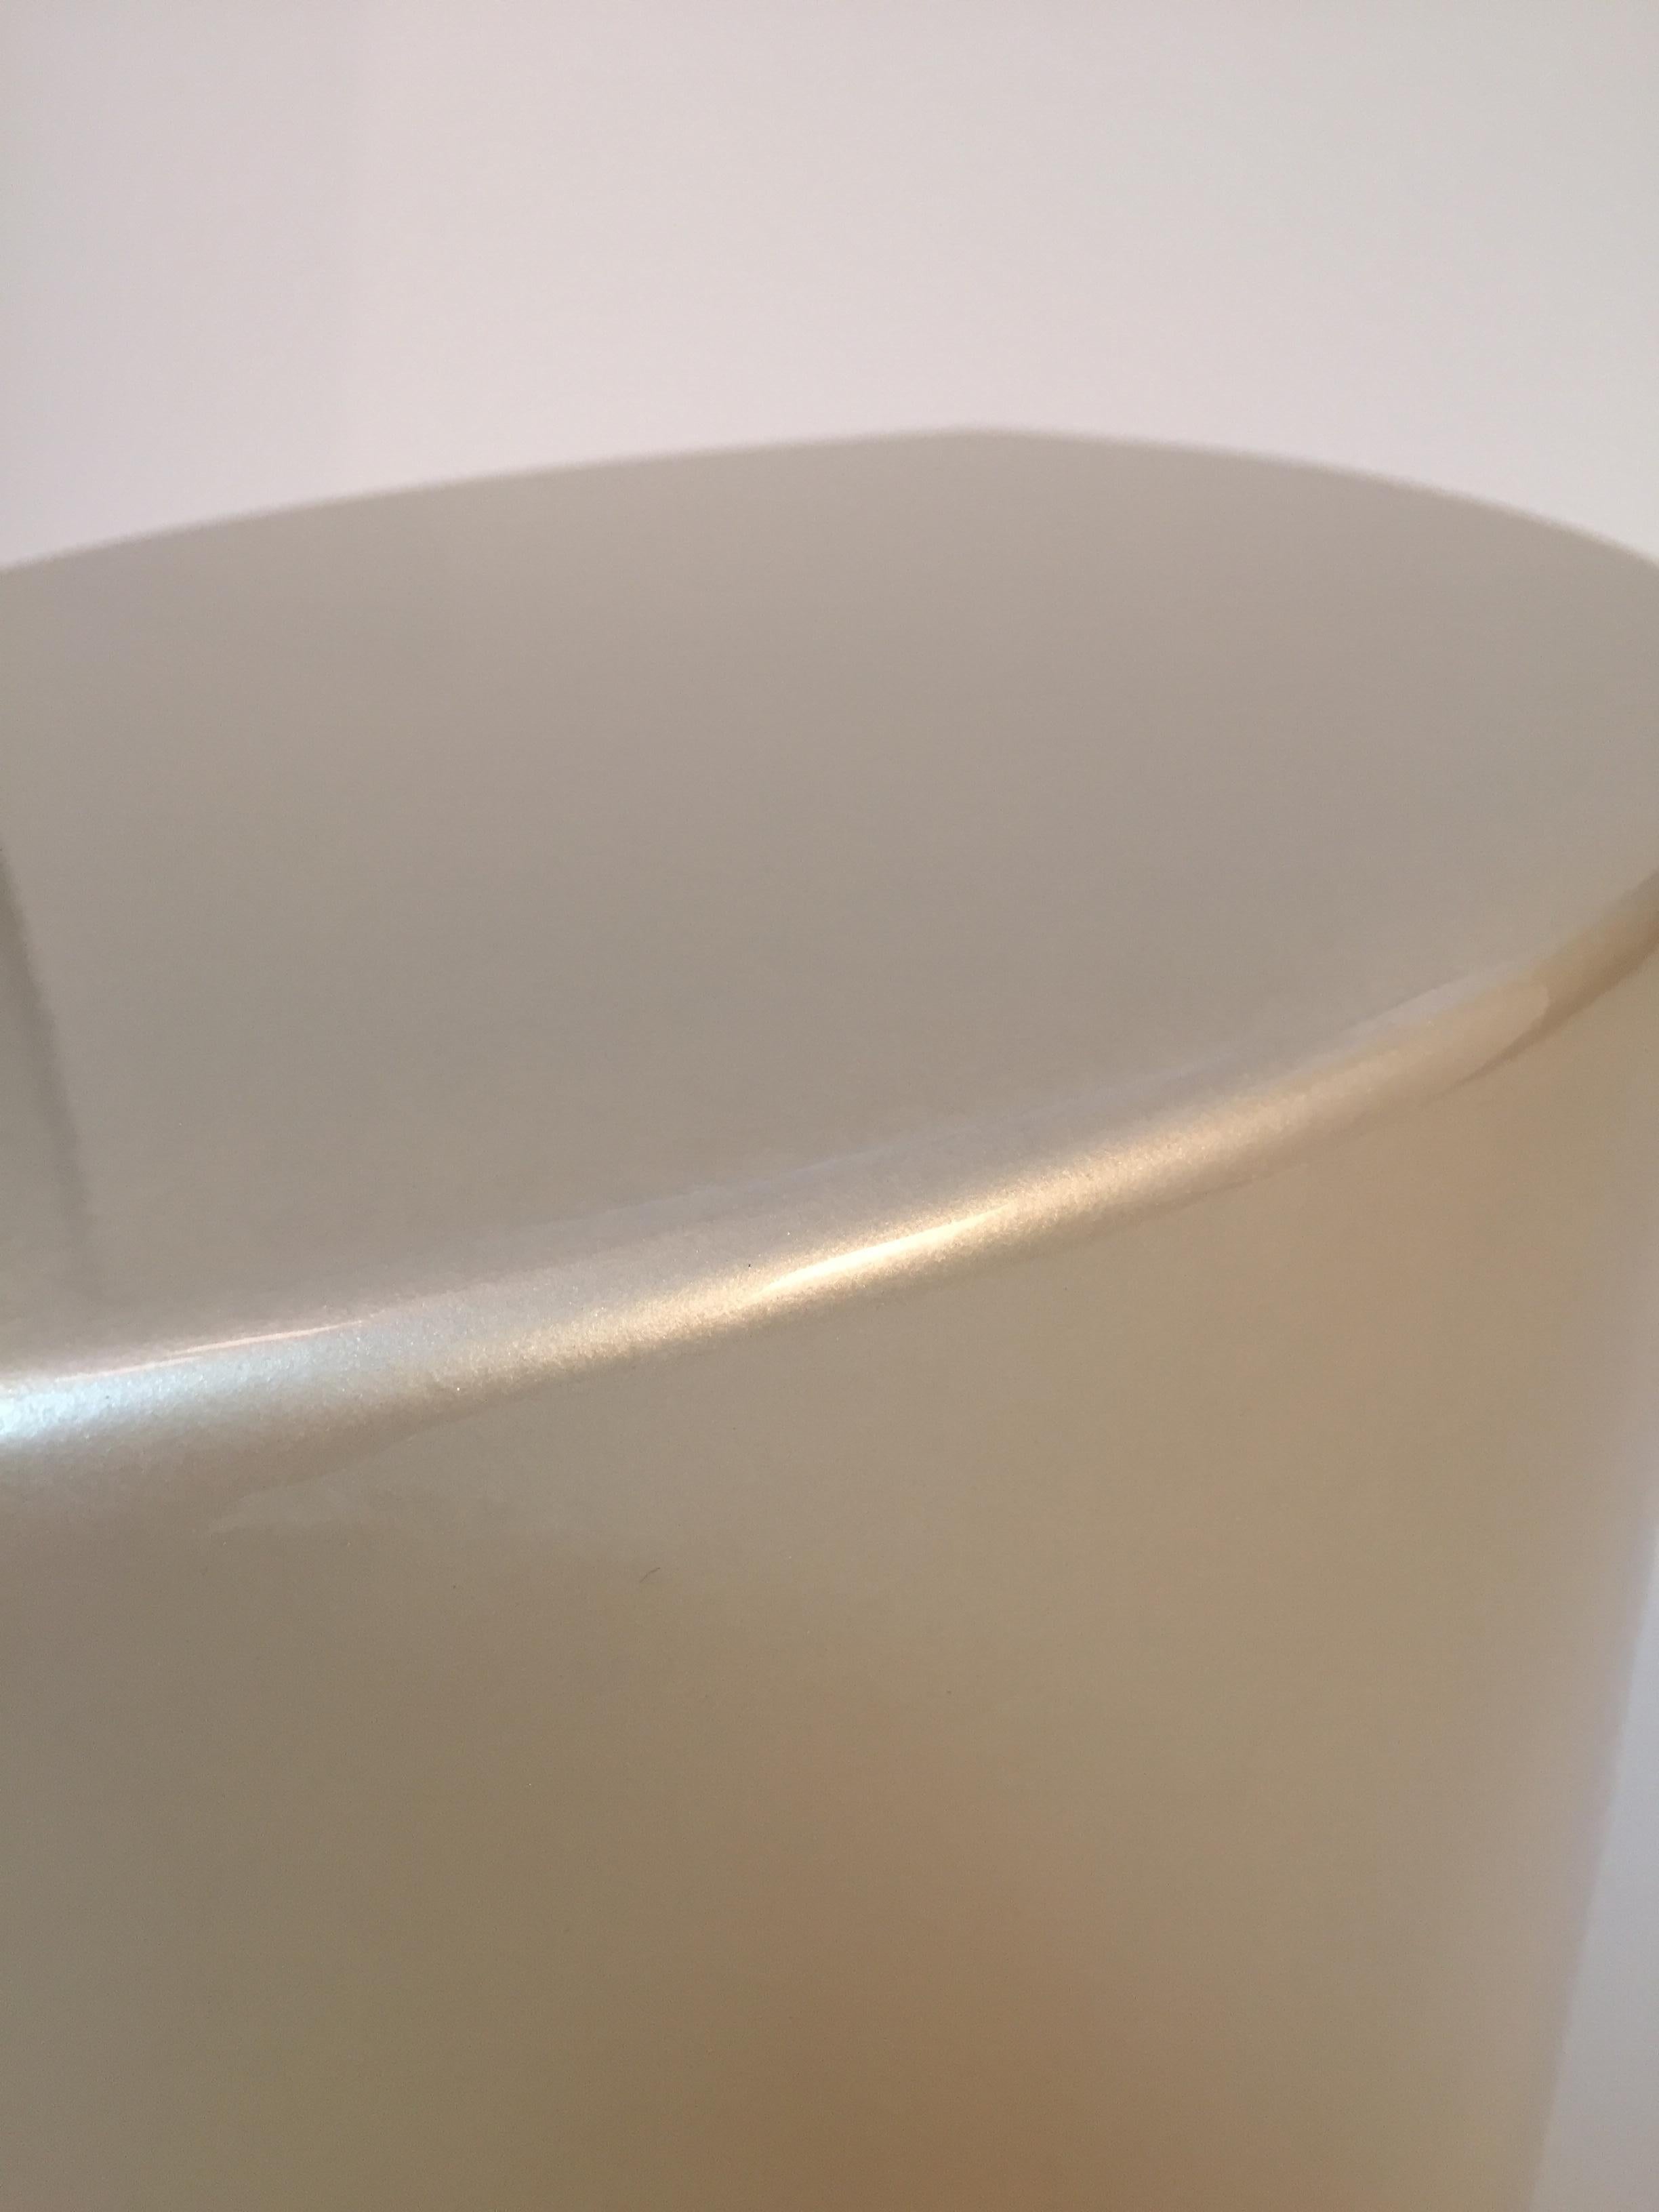 American Metallic Gold Gloss Lacquer Side Table Seat For Sale